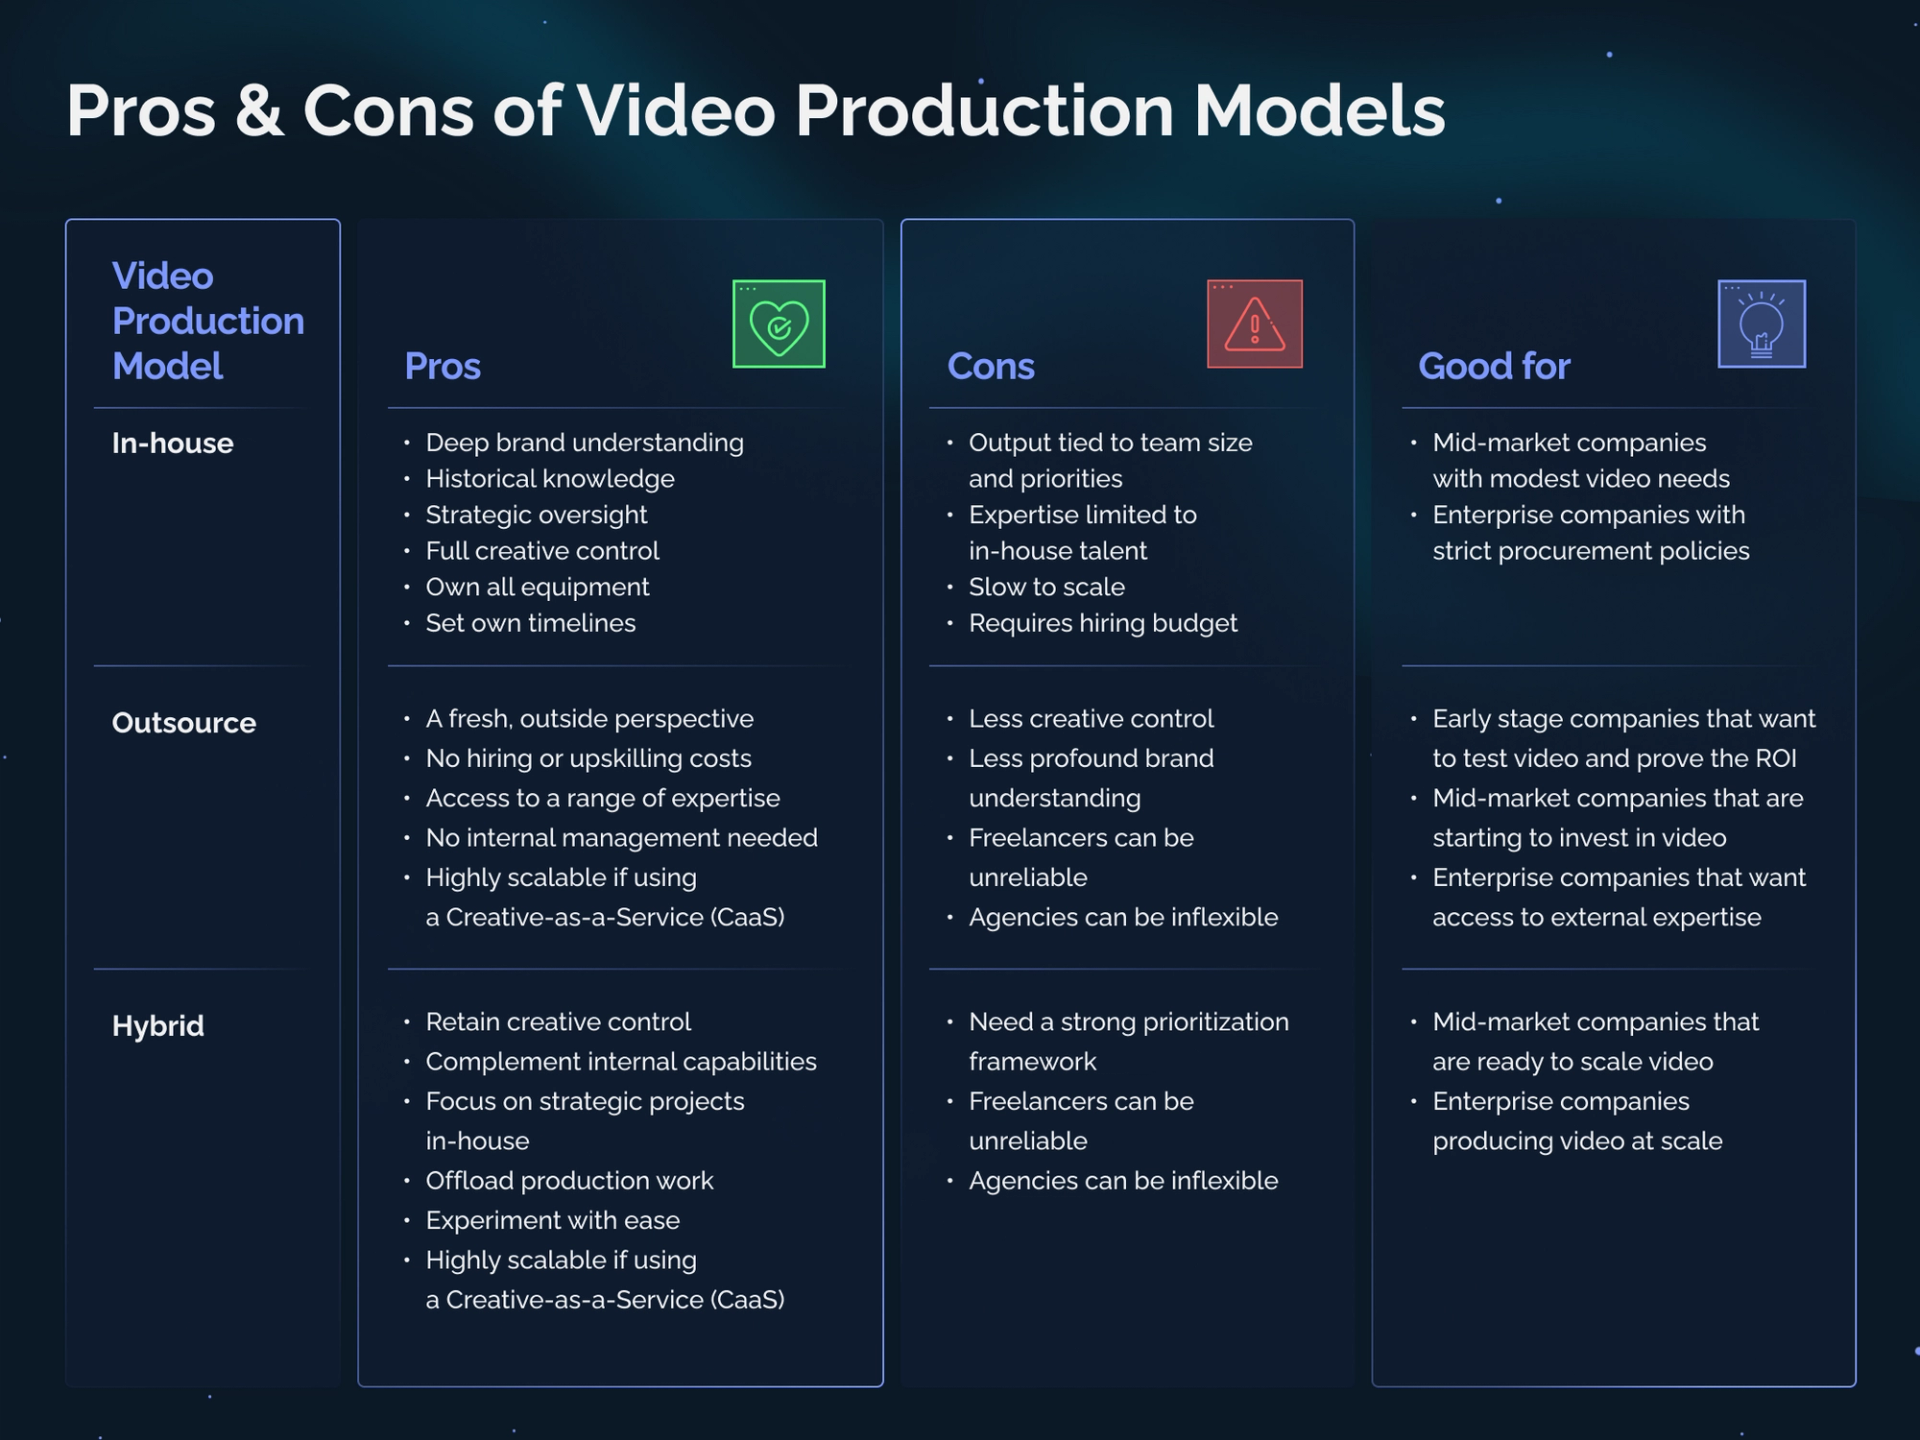 Pros & Cons of Video Production Models